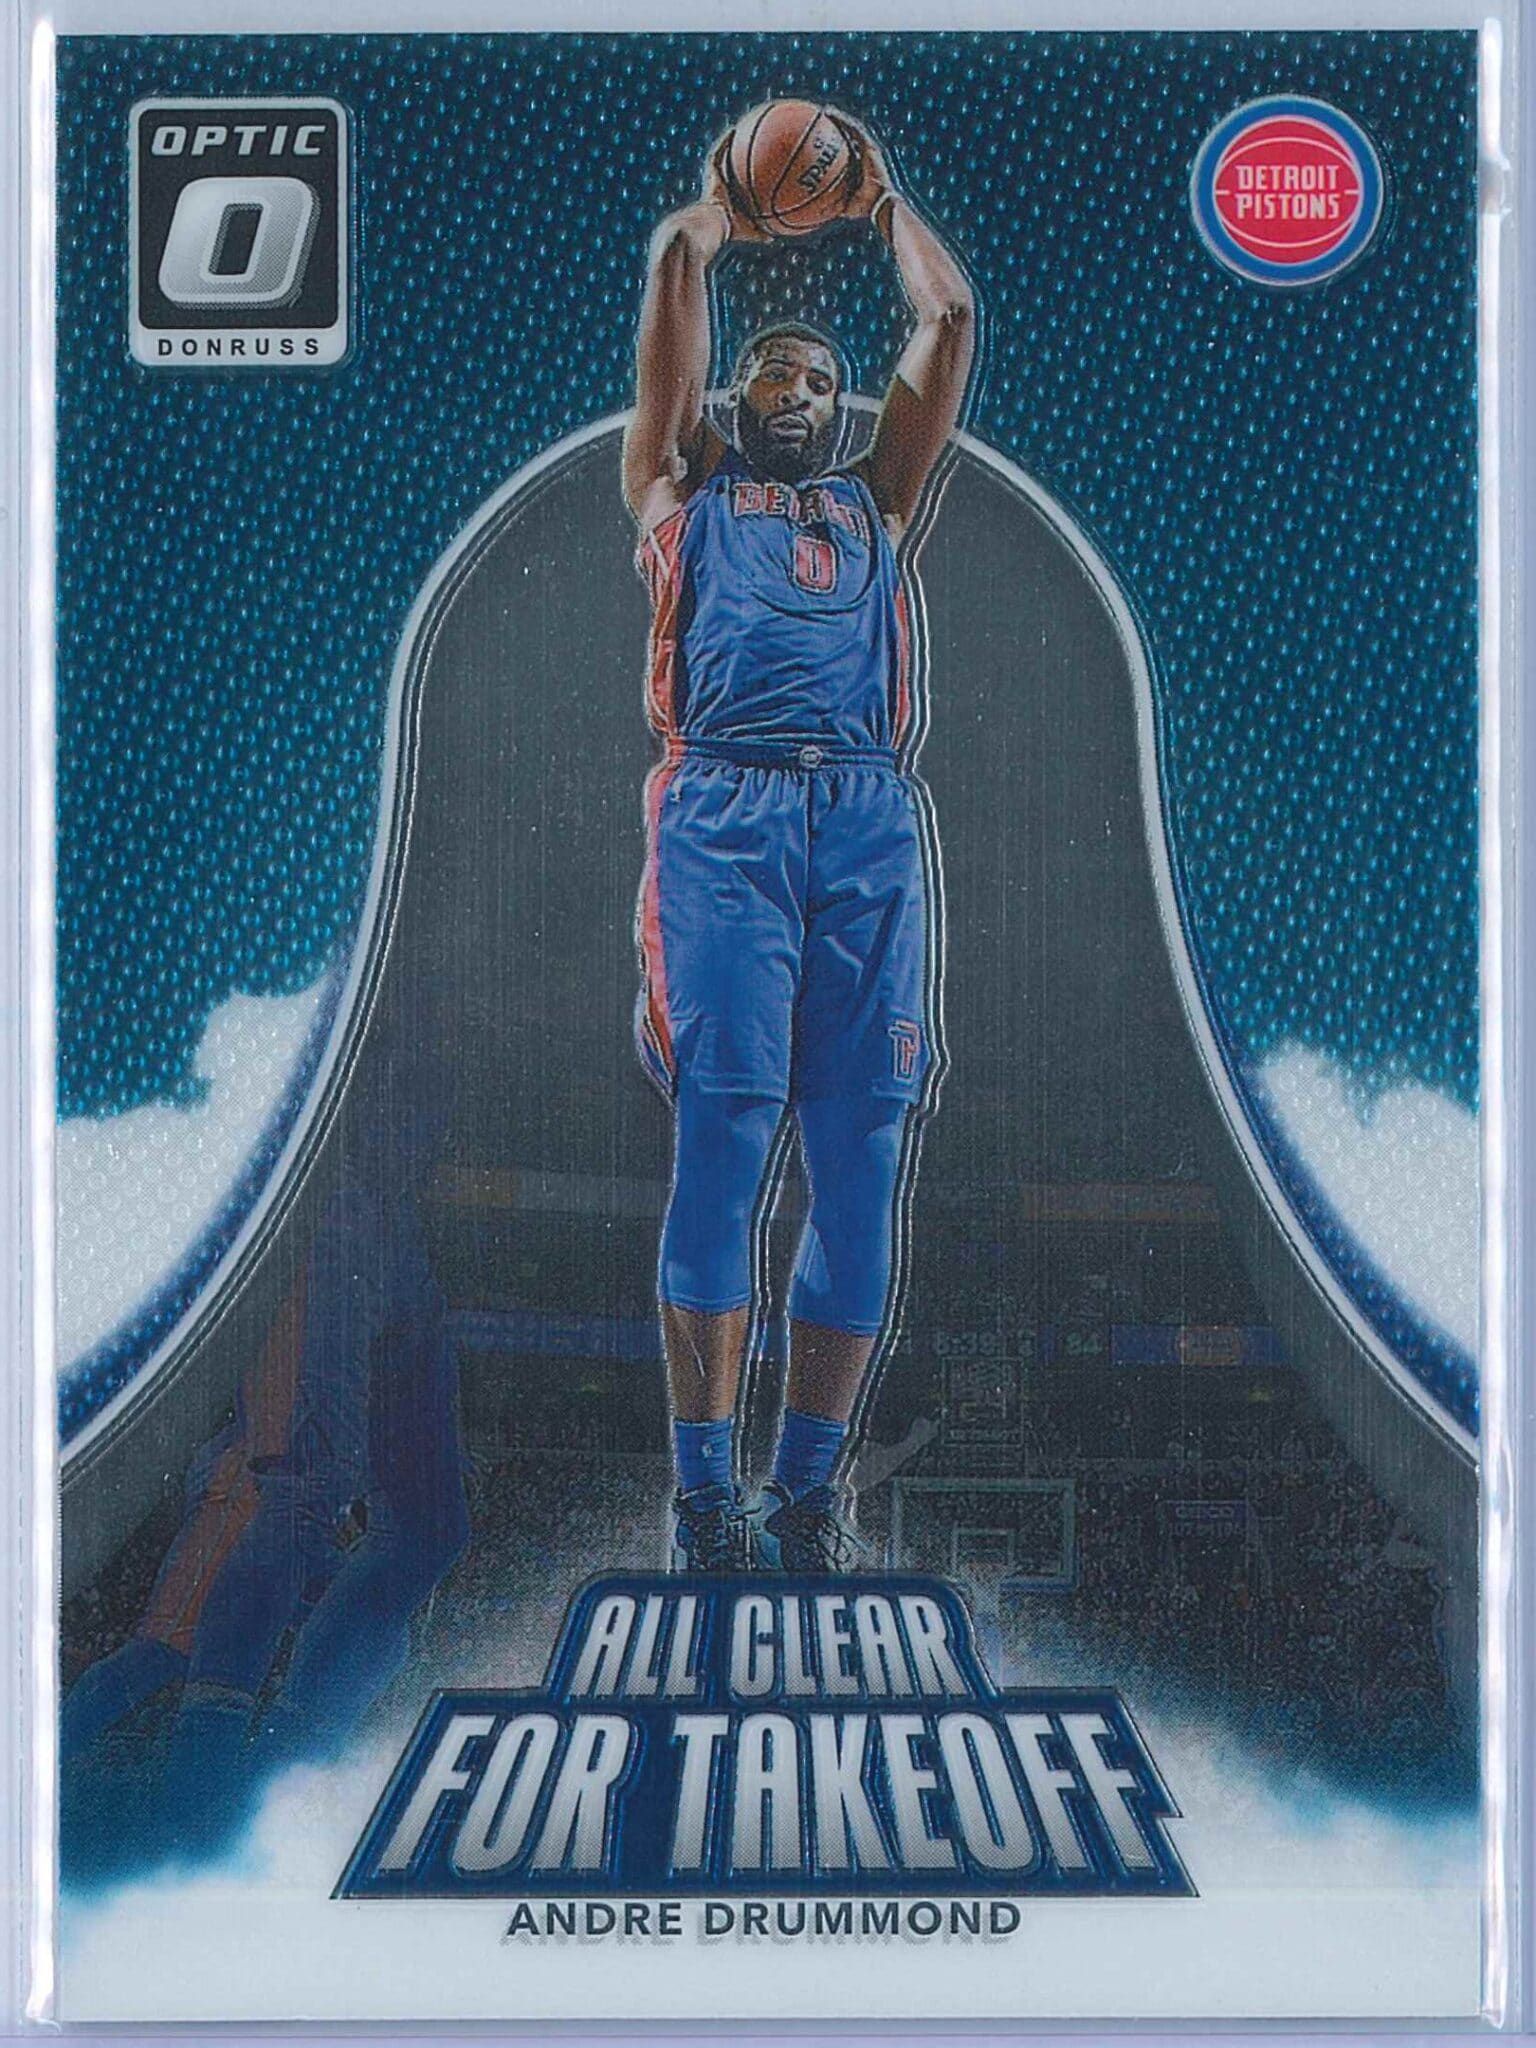 Andre Drummond Panini Donruss Optic Basketball  2017-18 All Clear For Takeoff